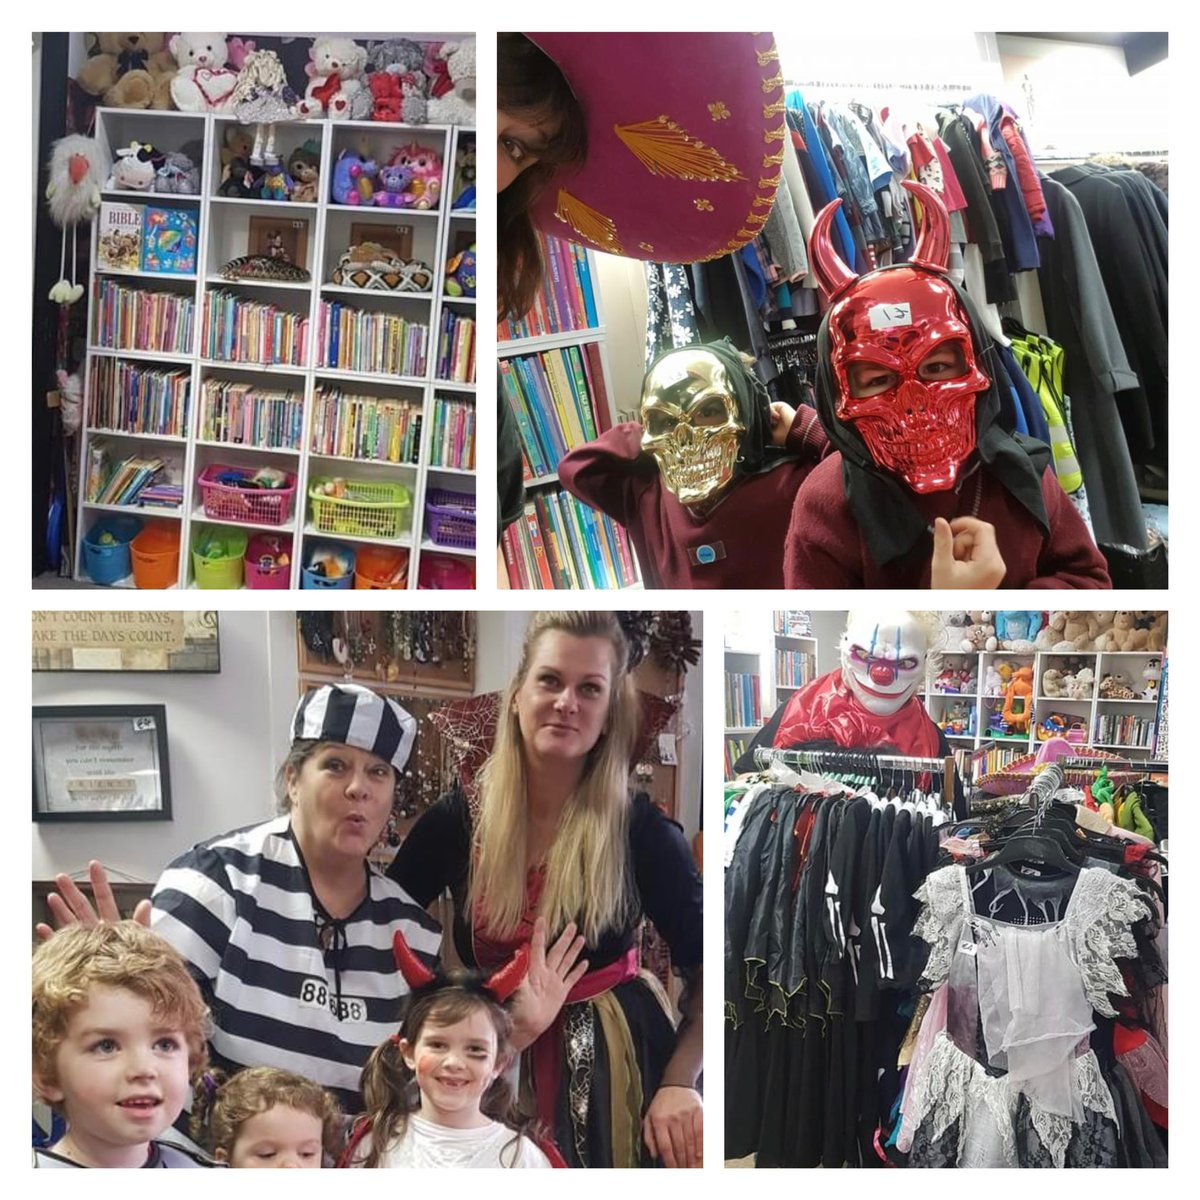 We have a spooky shop here in our #Moycullen shop beside Supervalu for all your dressing-up this #Halloween 🎃👻🛍 Pop in and bring your dog too for a visit as we’re #dogfriendly